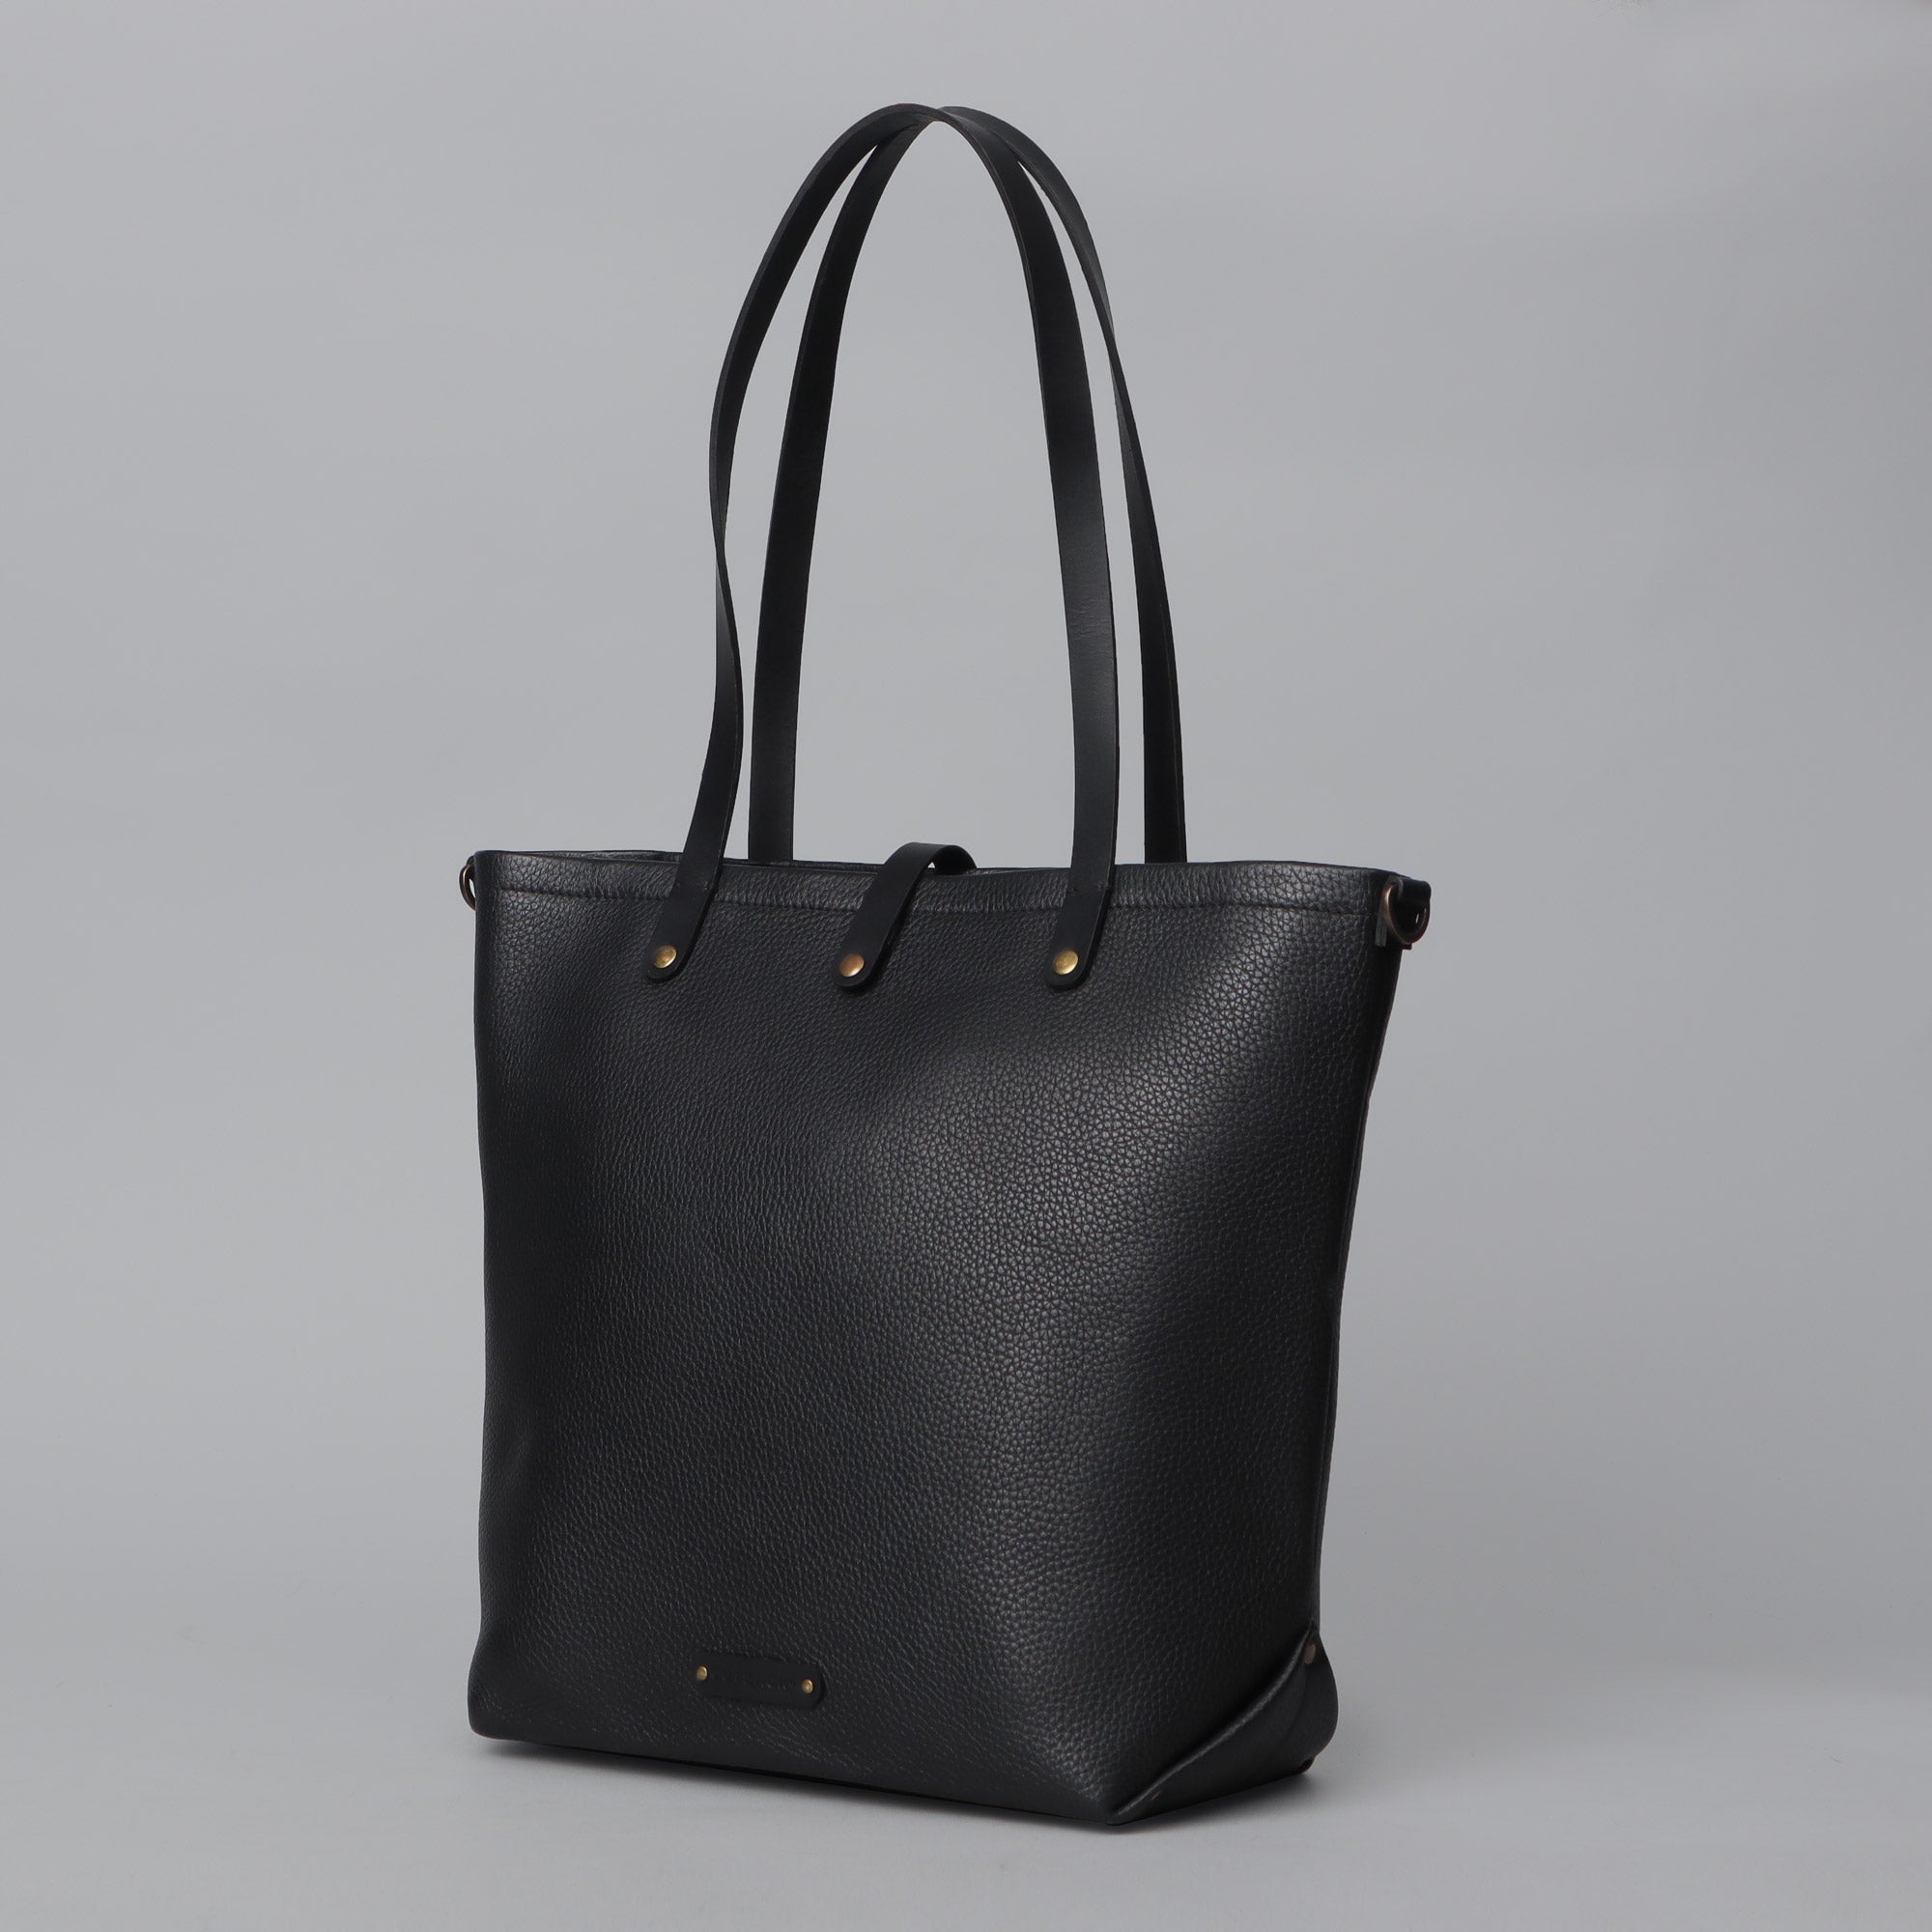 Madewell The Sydney Hobo Bag in True Black - Size One S